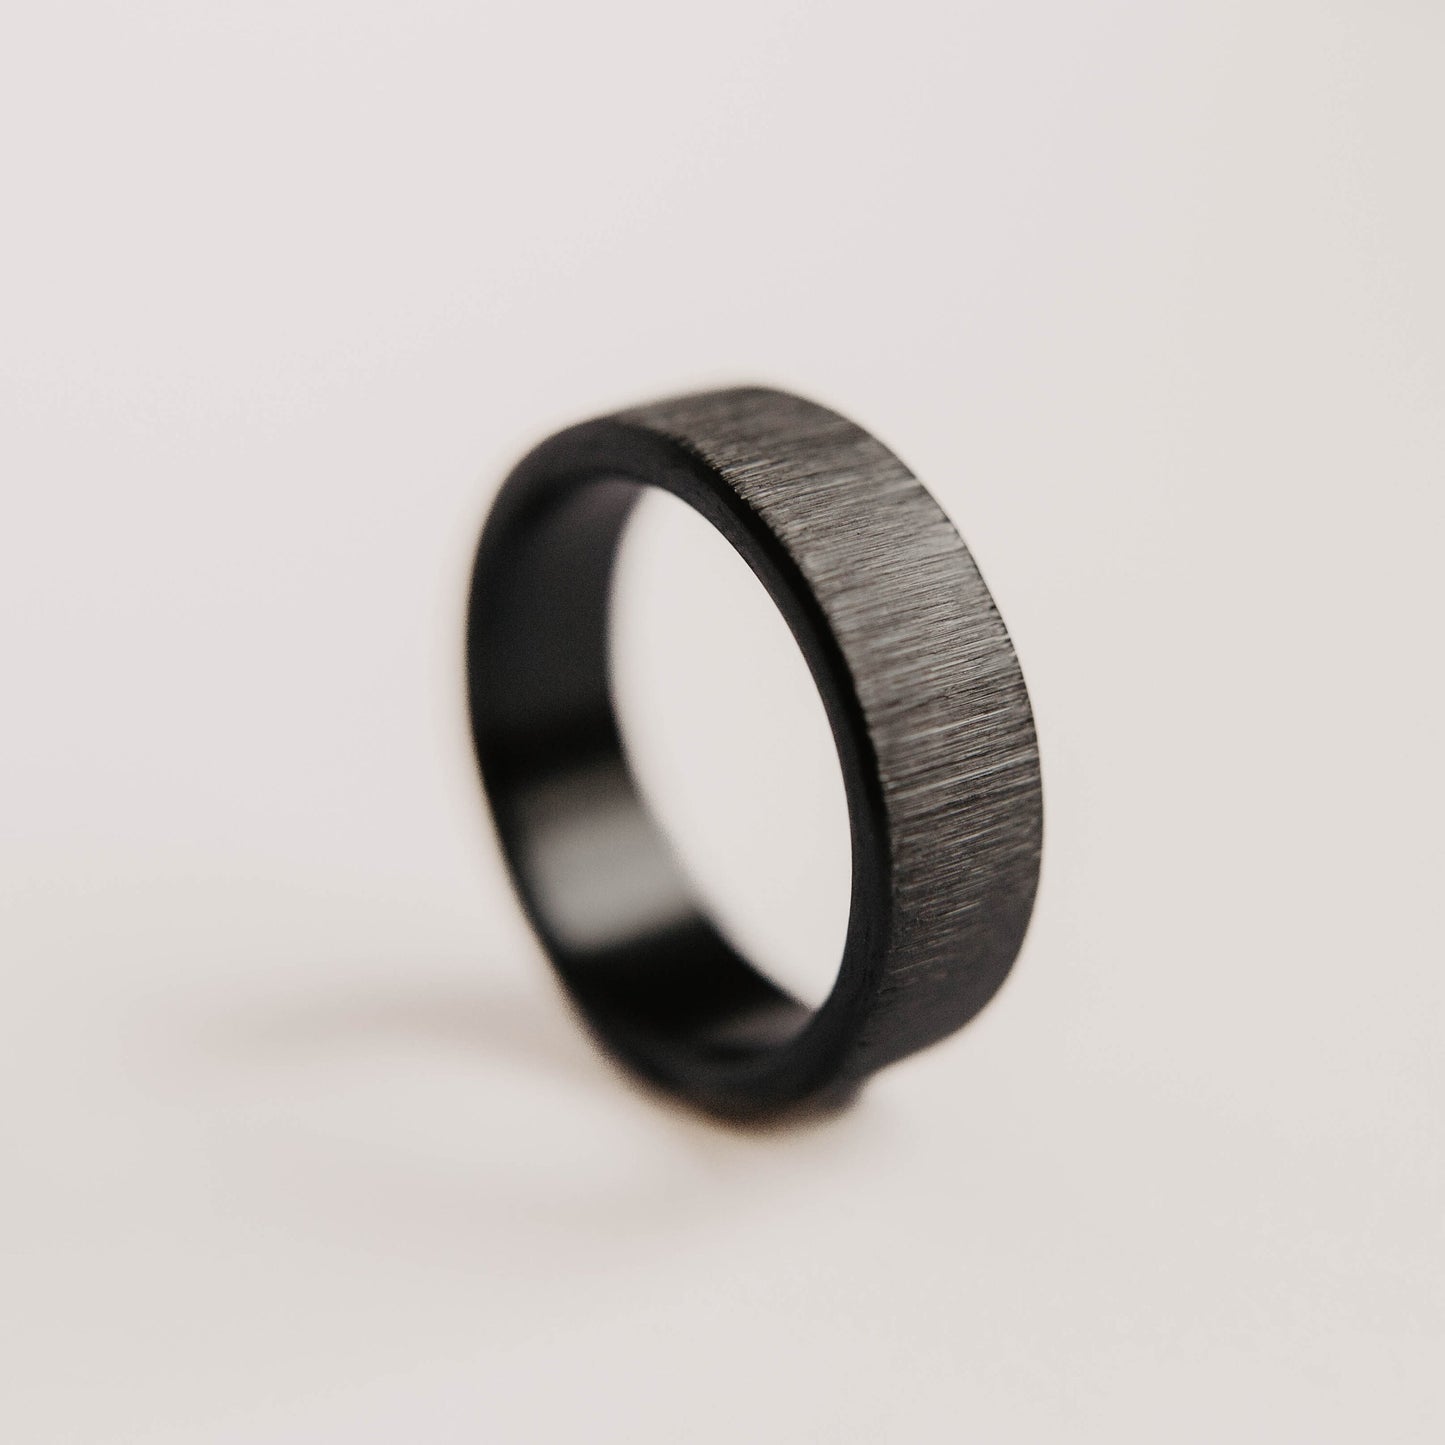 Vertical Grit Zirconium Mens Wedding band. This photo shows a vertical grit zirconium band. (Vertical with white background)